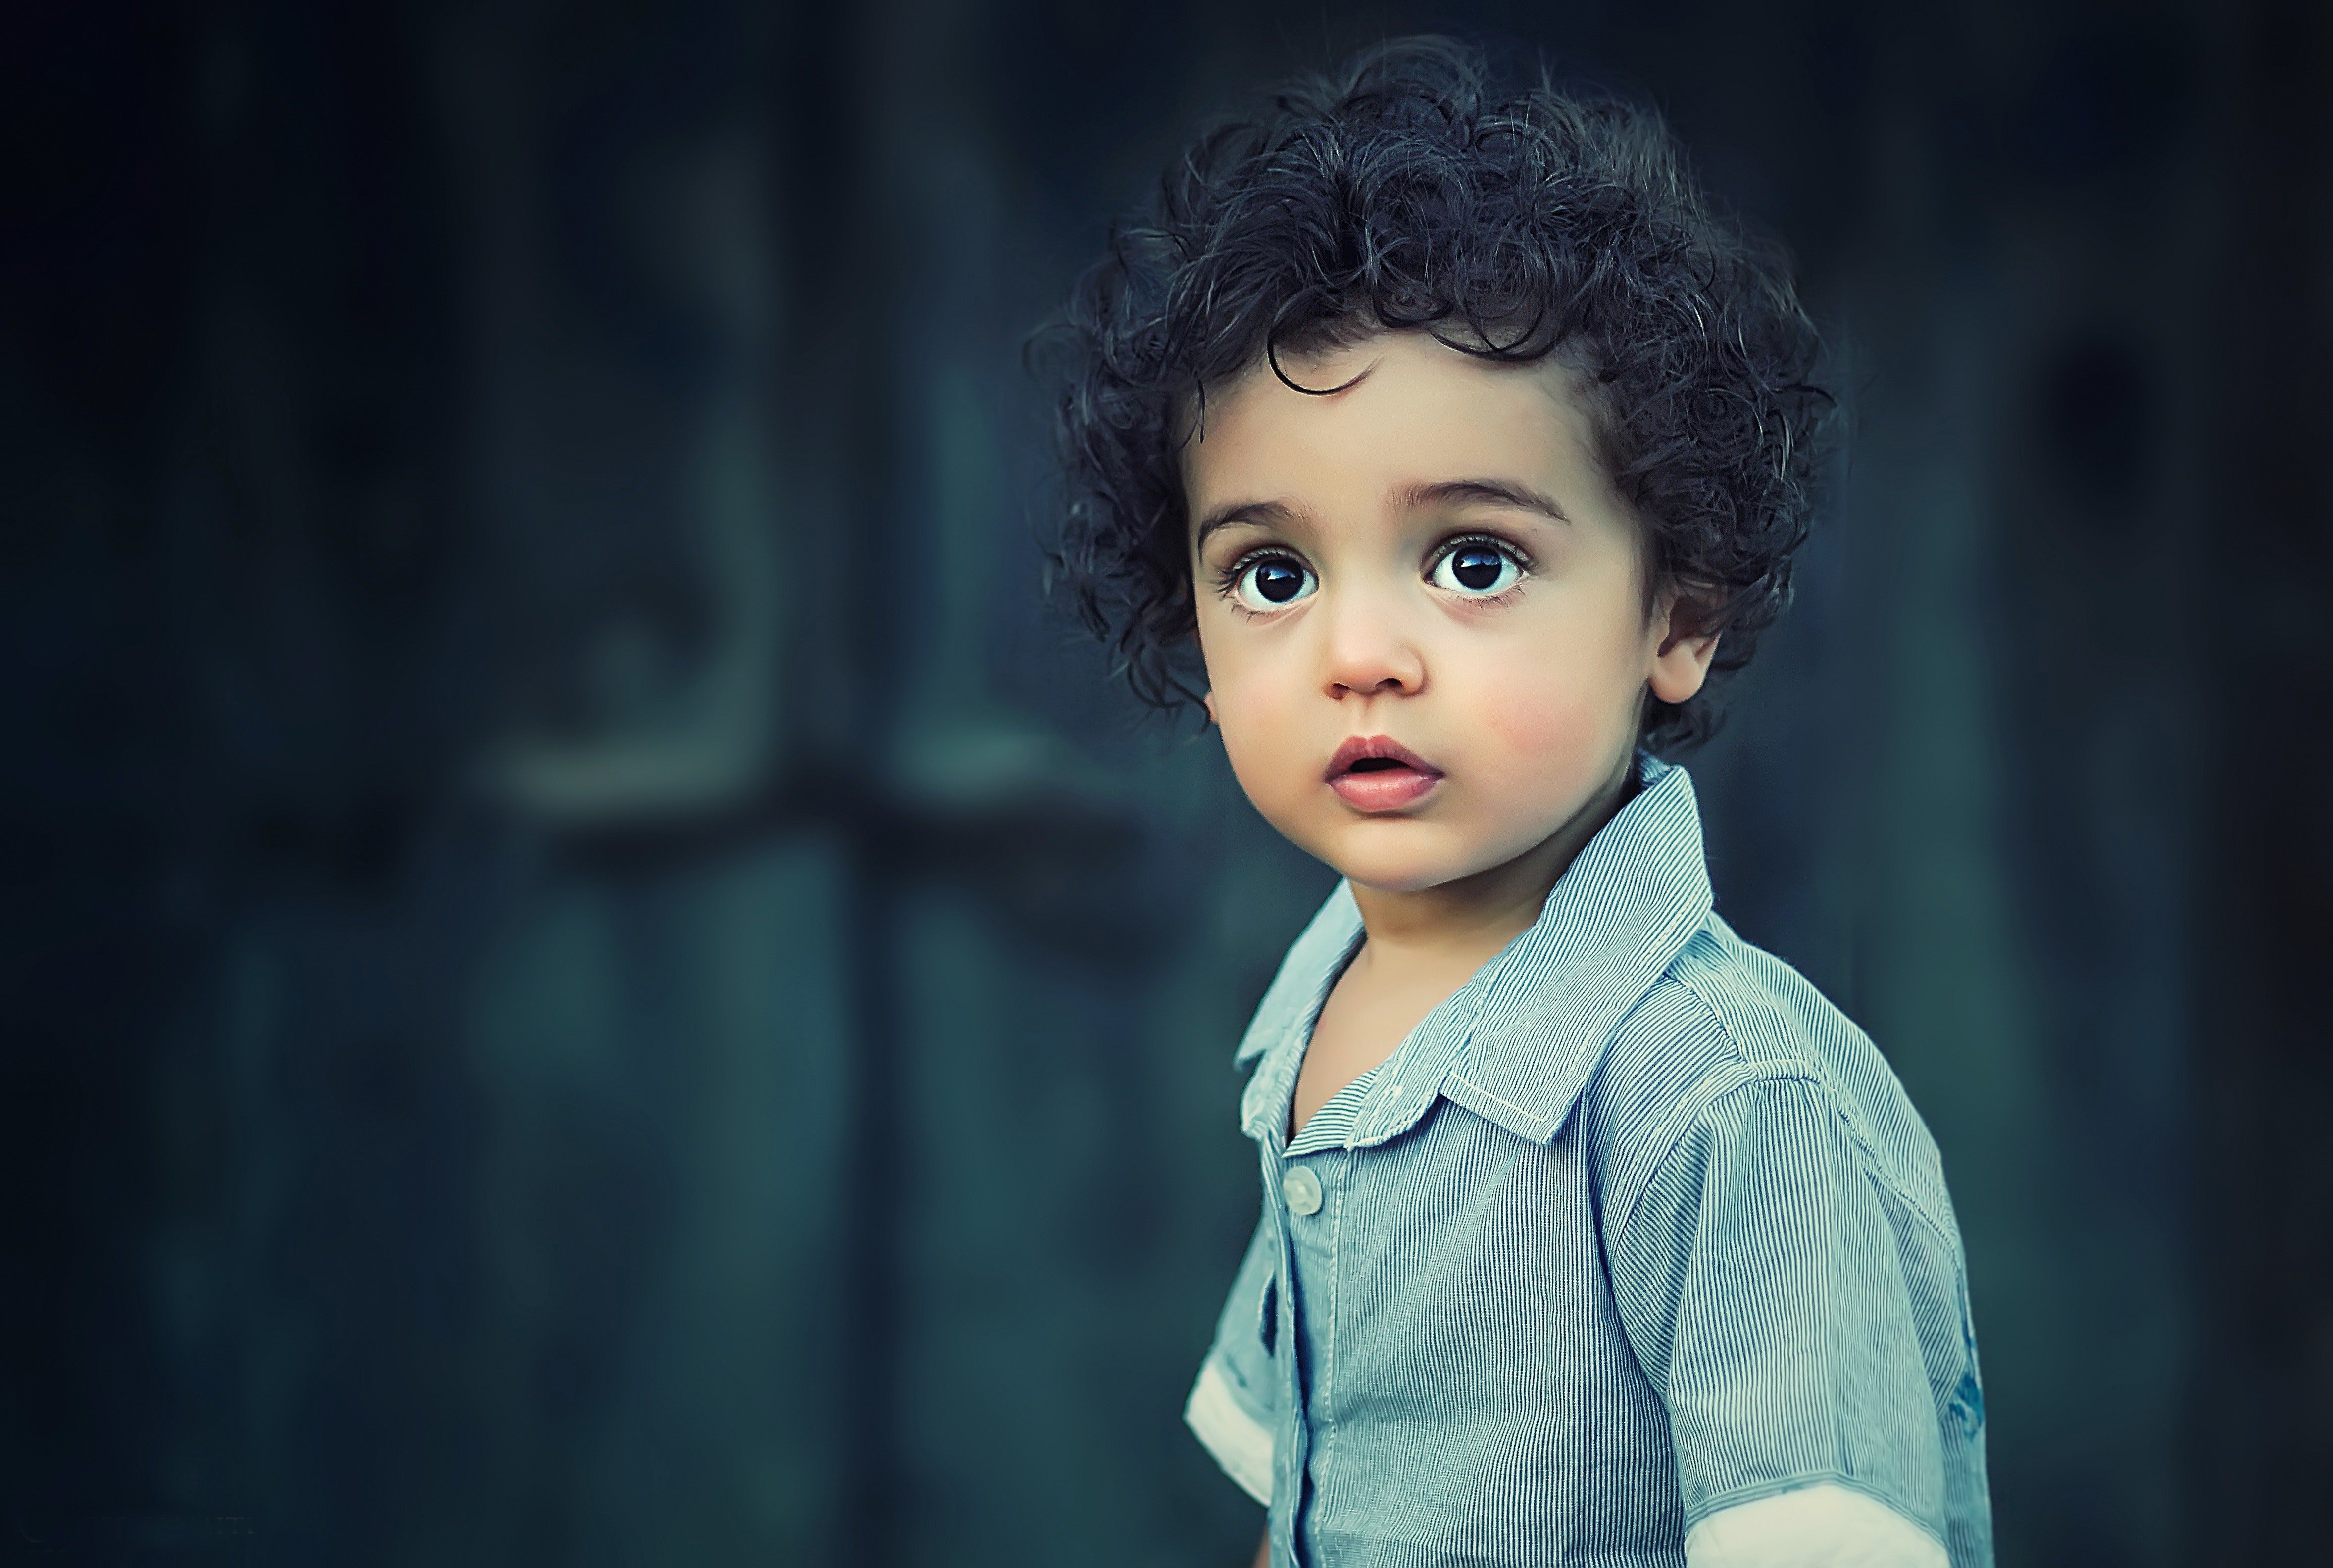 Toddle Wearing Gray Button Collared Shirt With Curly Hair · Free